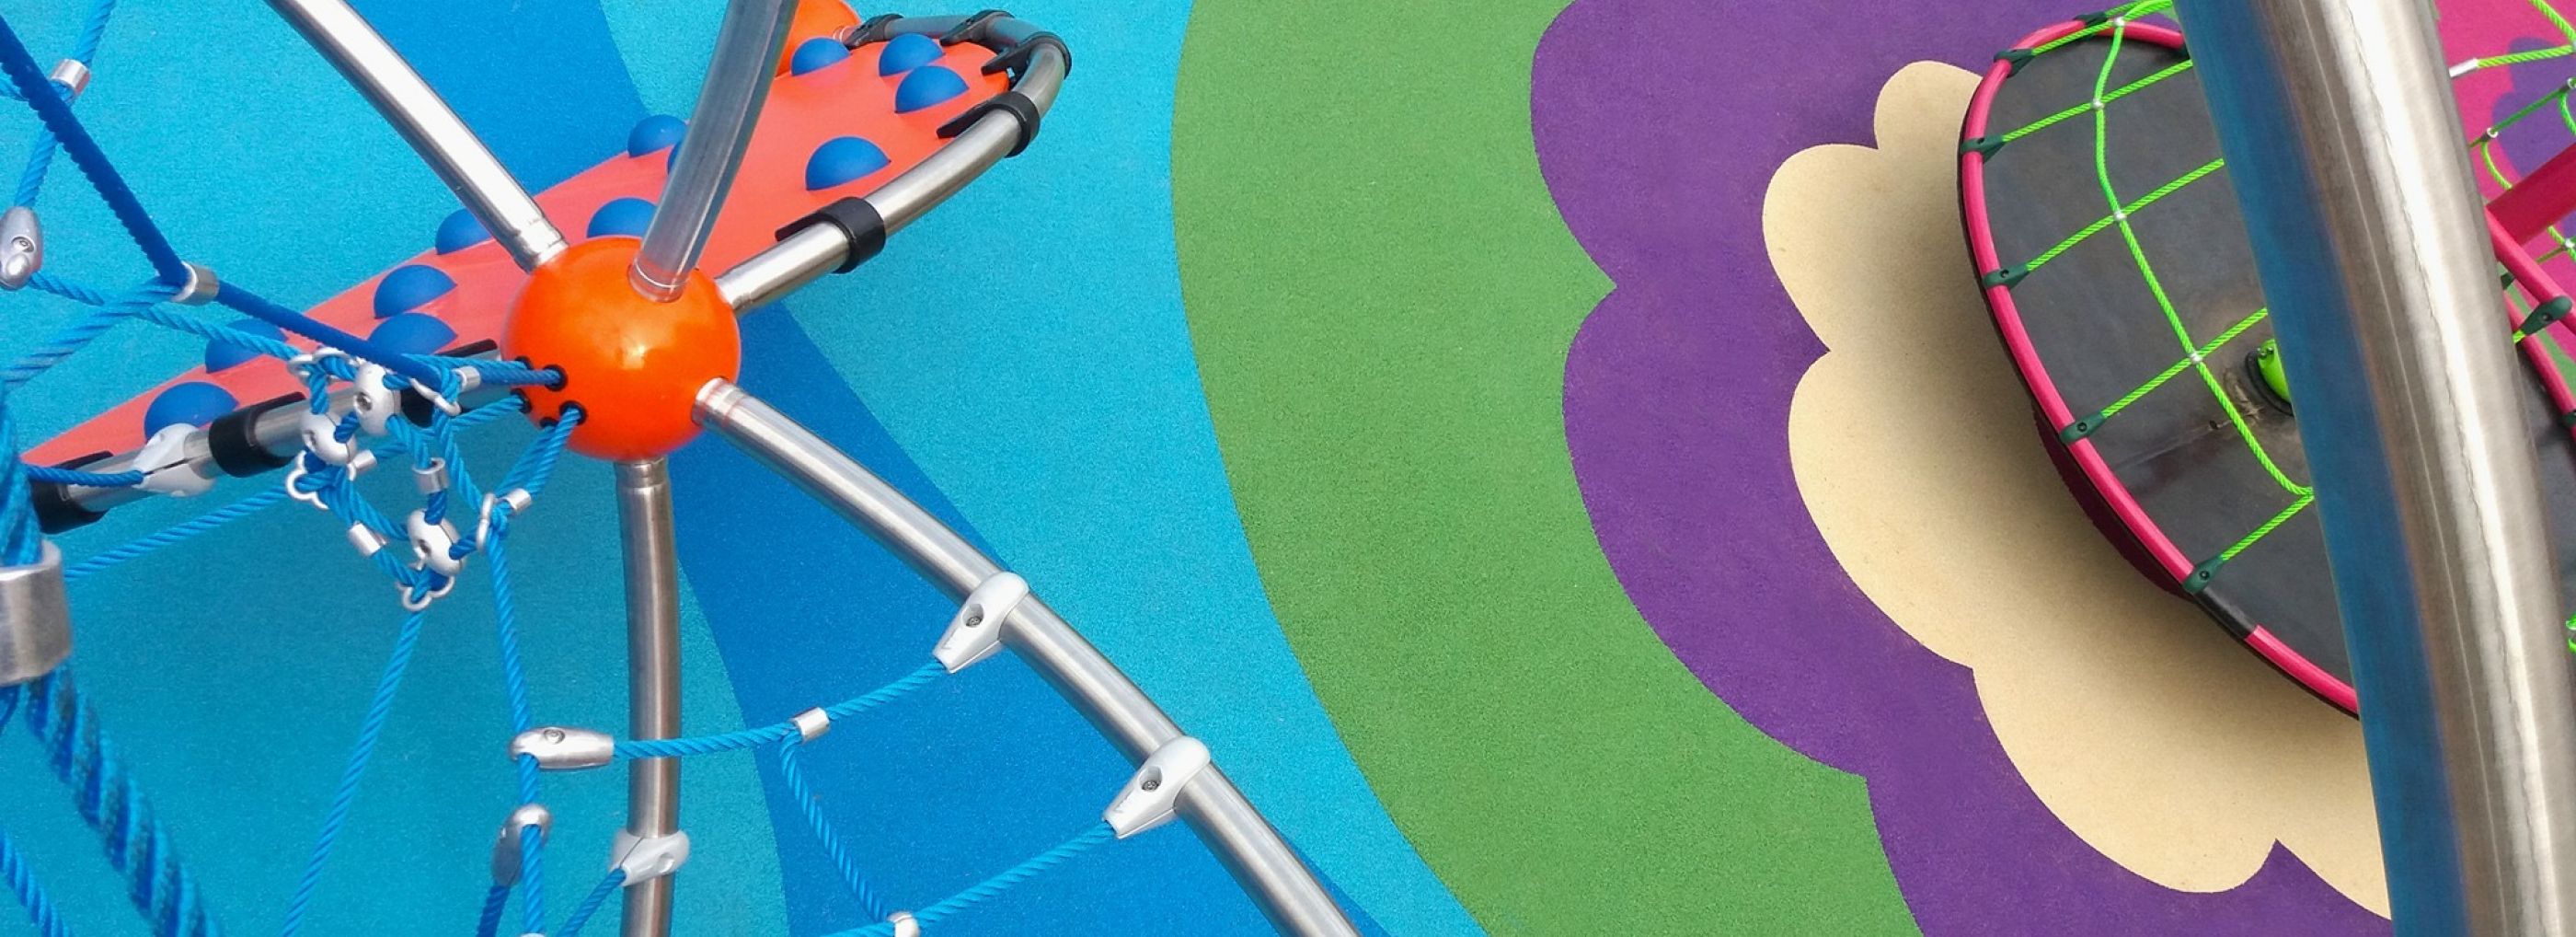 Colourful playground rubber flooring.